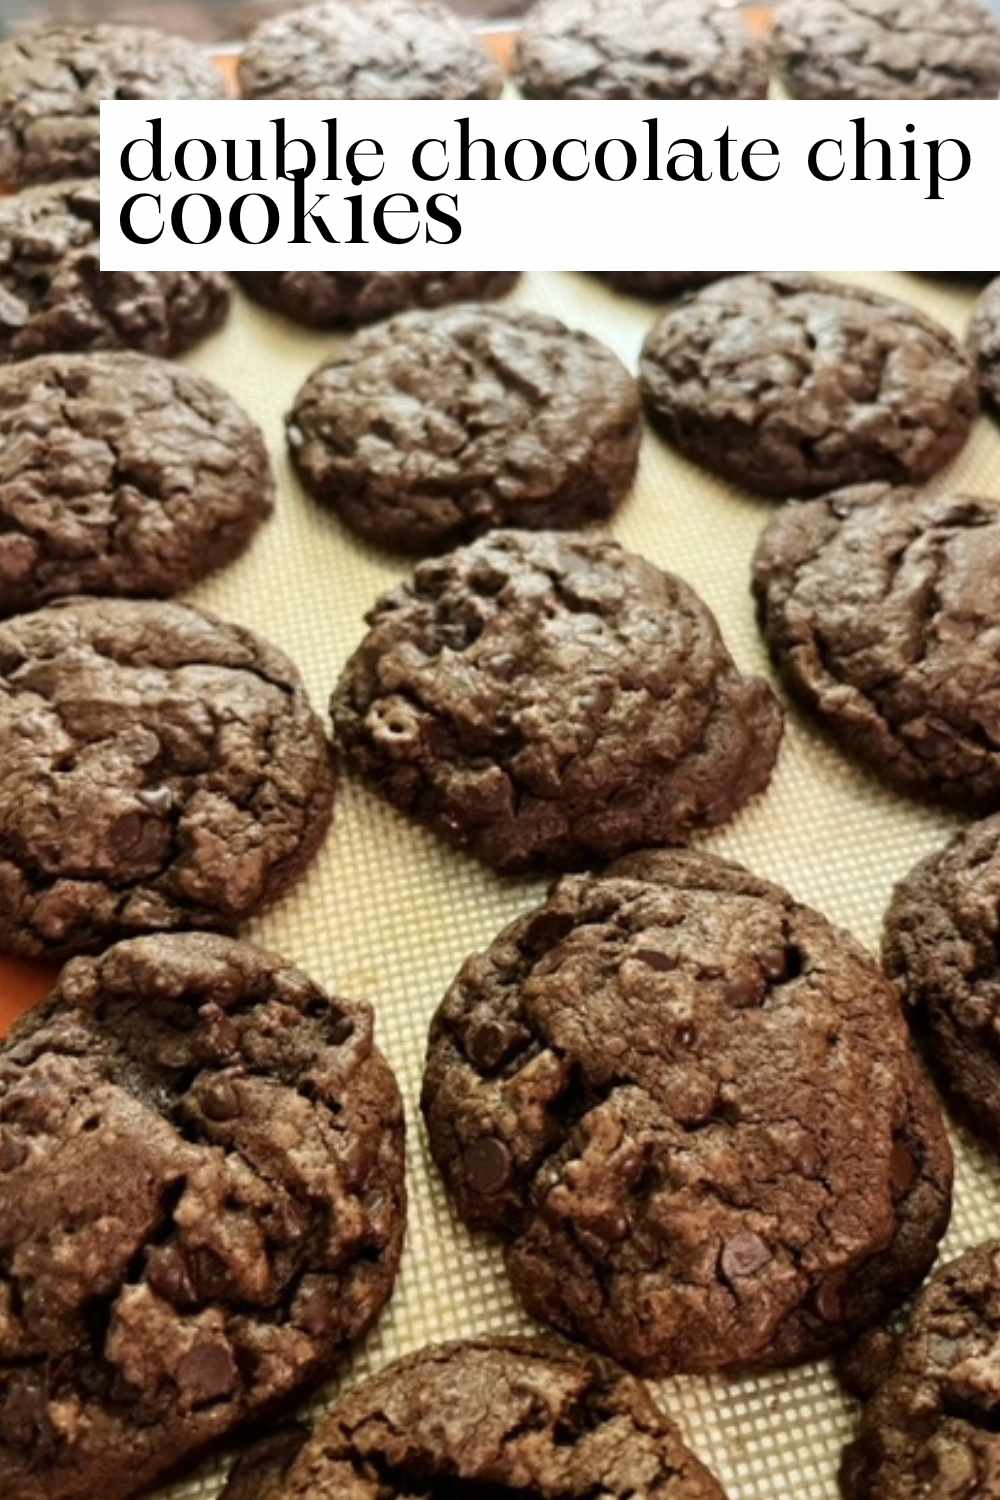 These cookies are for the chocolate lovers! This double chocolate chip cookies recipe combines a chocolate cookie dough and chocolate chips.